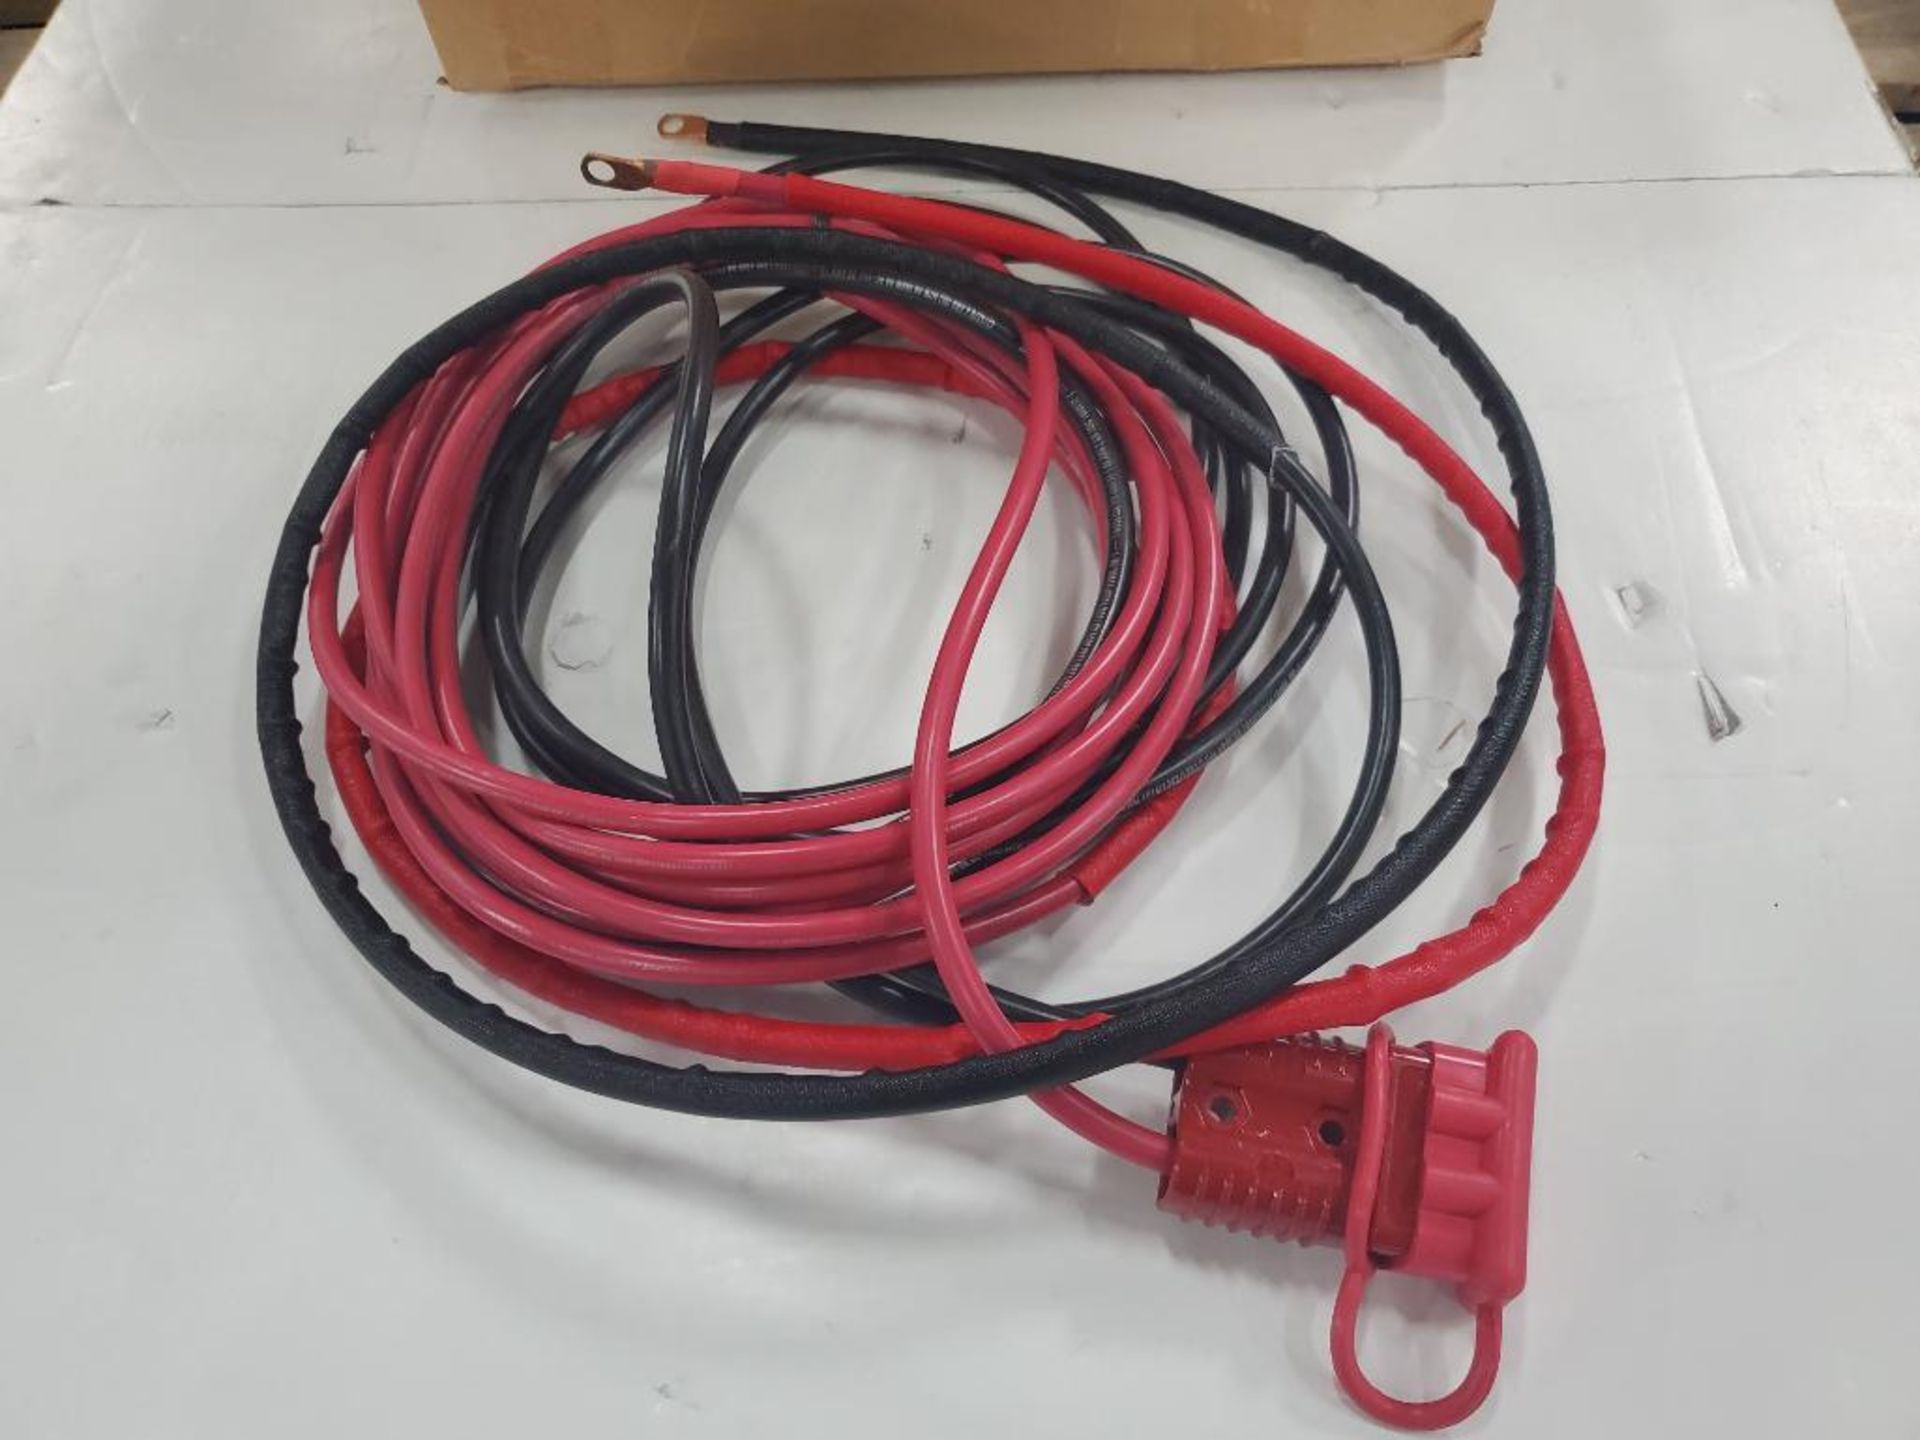 Qty 14 - Anderson 23ft battery adapter cable. RBARA23FT4-G1. 175A, 600V plug. New in box.